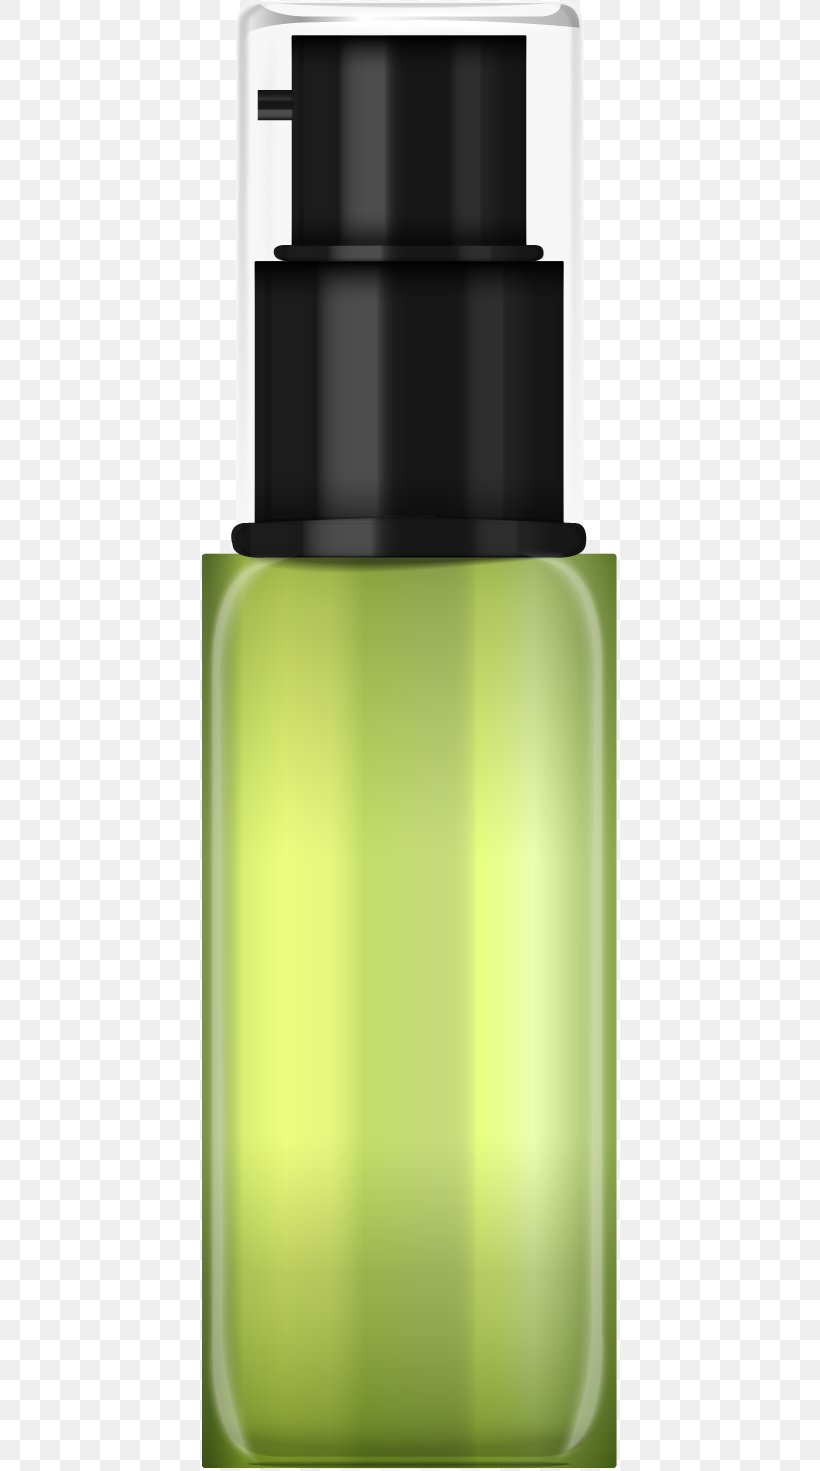 Spray Bottle Glass Bottle Spray Painting, PNG, 415x1471px, Spray Bottle, Aerosol Spray, Bottle, Glass Bottle, Green Download Free